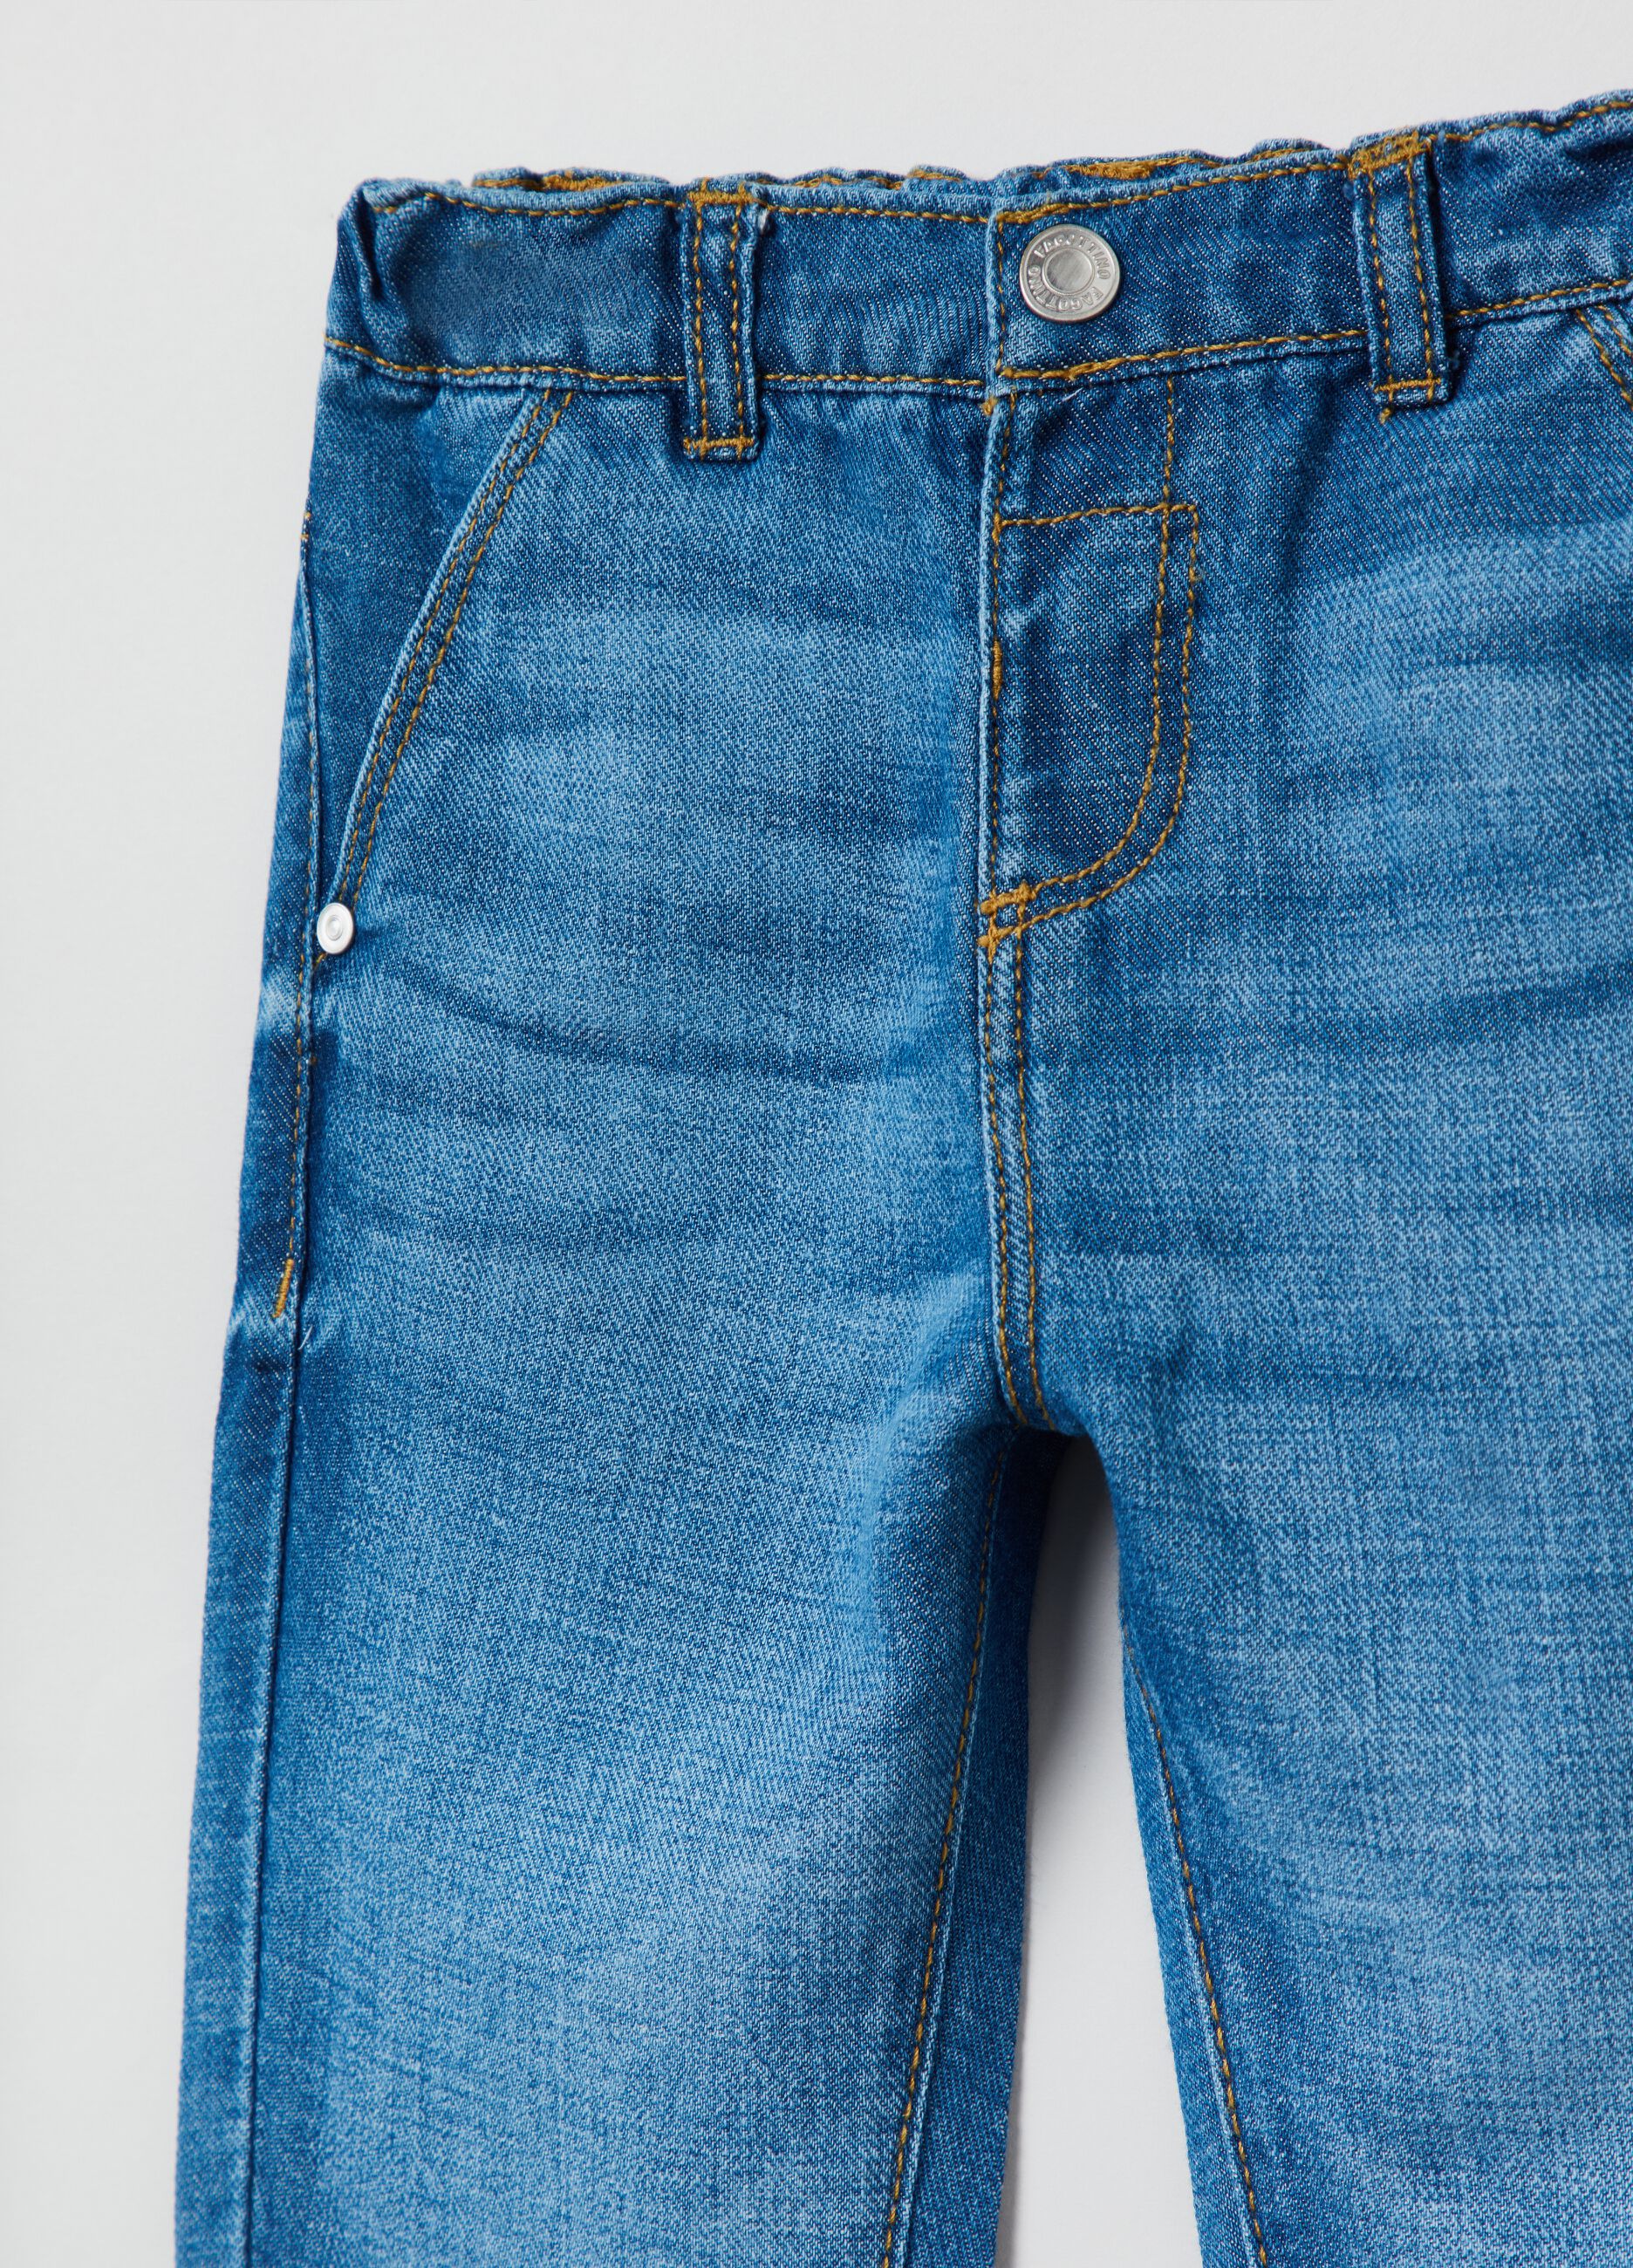 Cotton and linen jeans with pockets